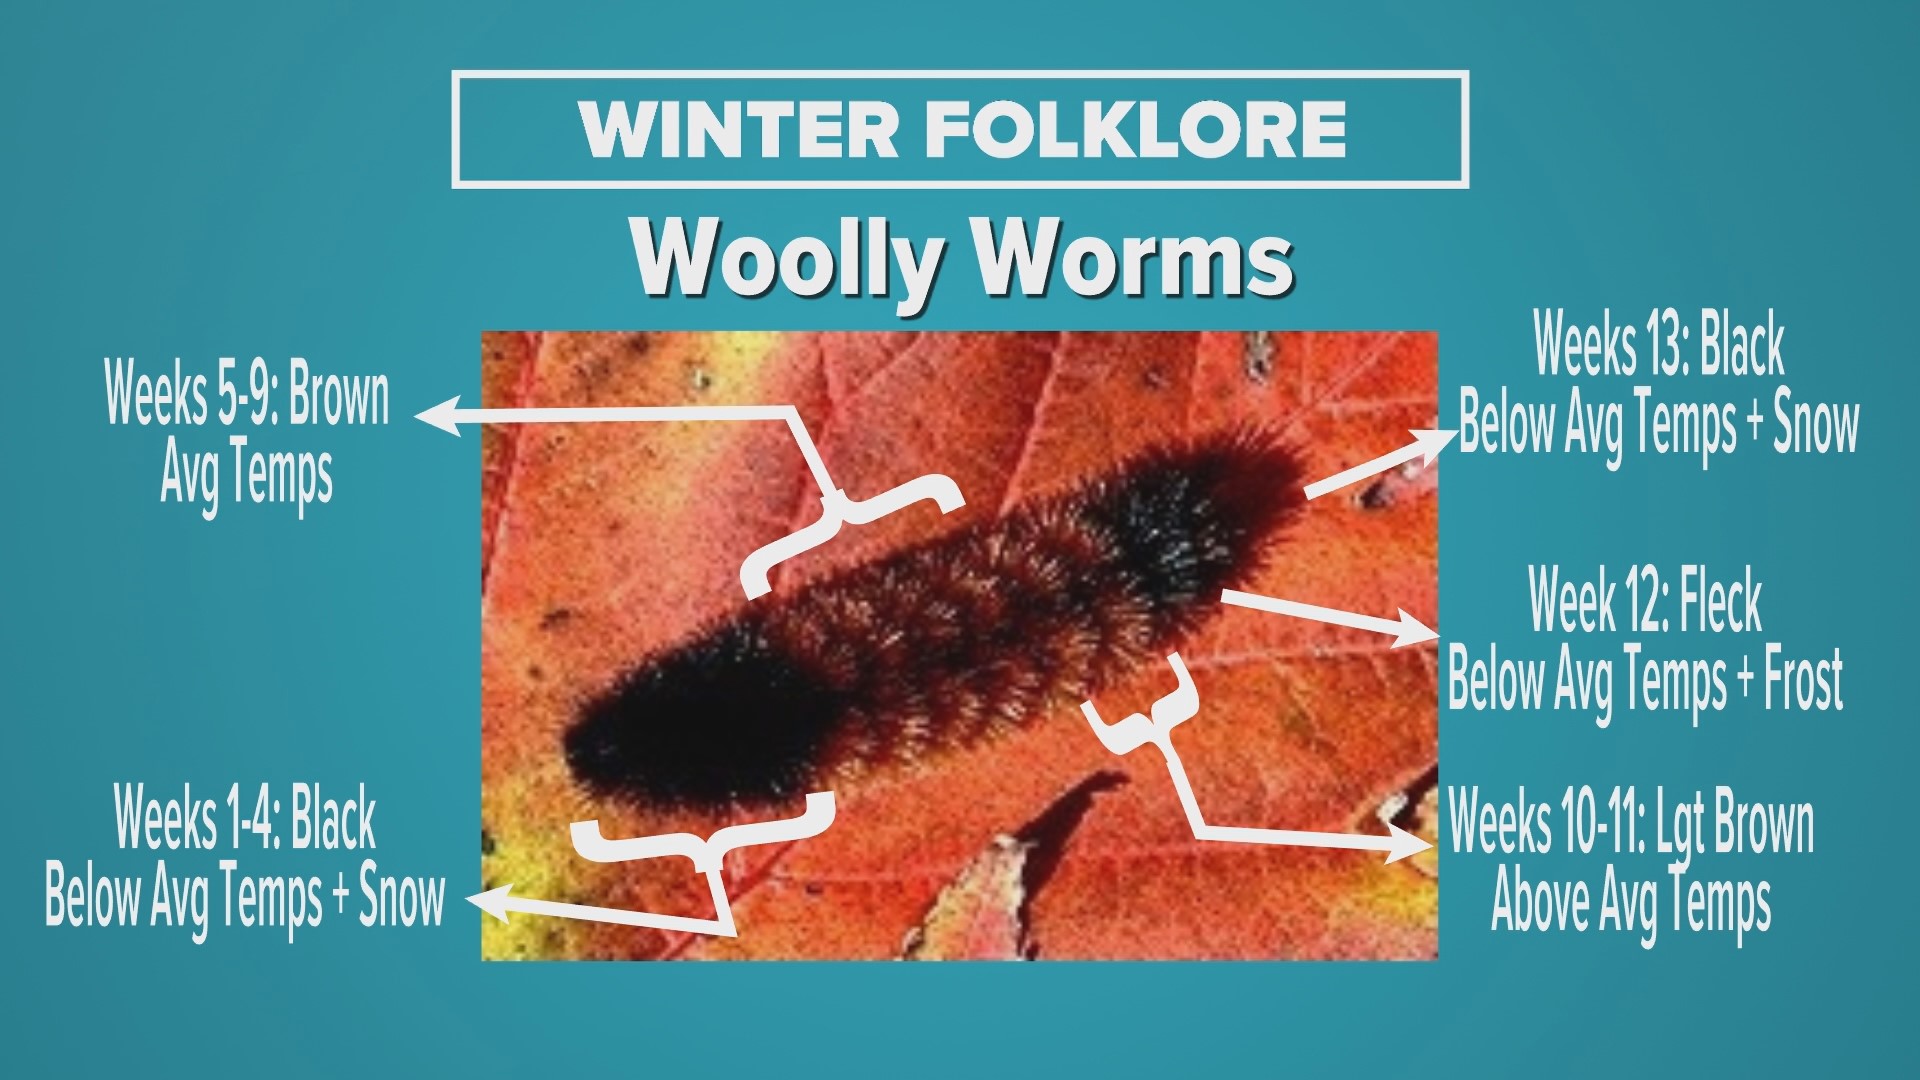 Persimmon seeds and woolly worms predict a snowy winter